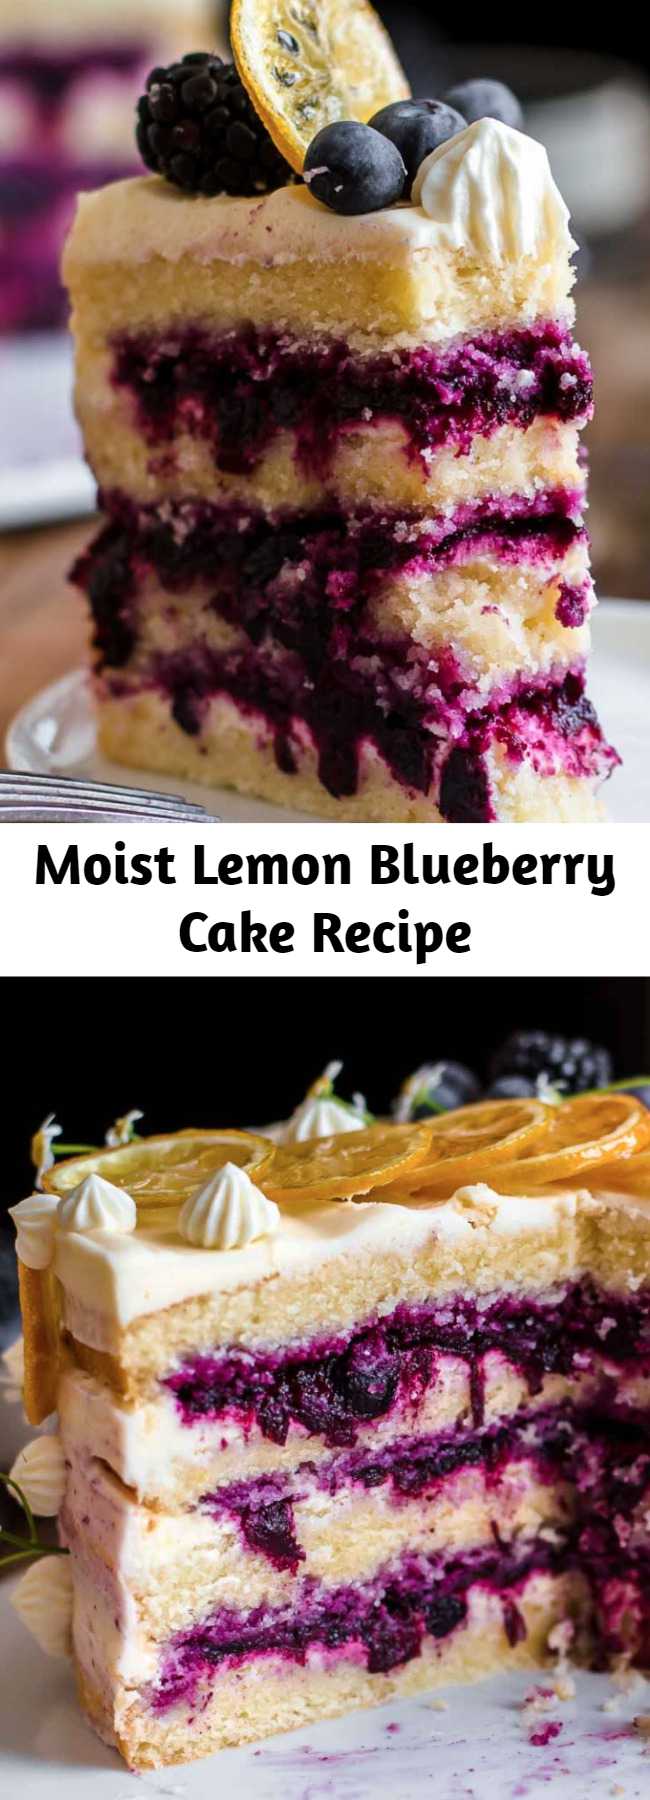 Moist Lemon Blueberry Cake Recipe - This Lemon Blueberry Cake is tangy, sweet, super moist, and creamy. The soft lemon cake layers are filled with a blueberry sauce filling and an ultra-creamy lemon cream cheese frosting. #lemon #blueberry #cake #creamcheesefrosting #baking #sweets #dessert